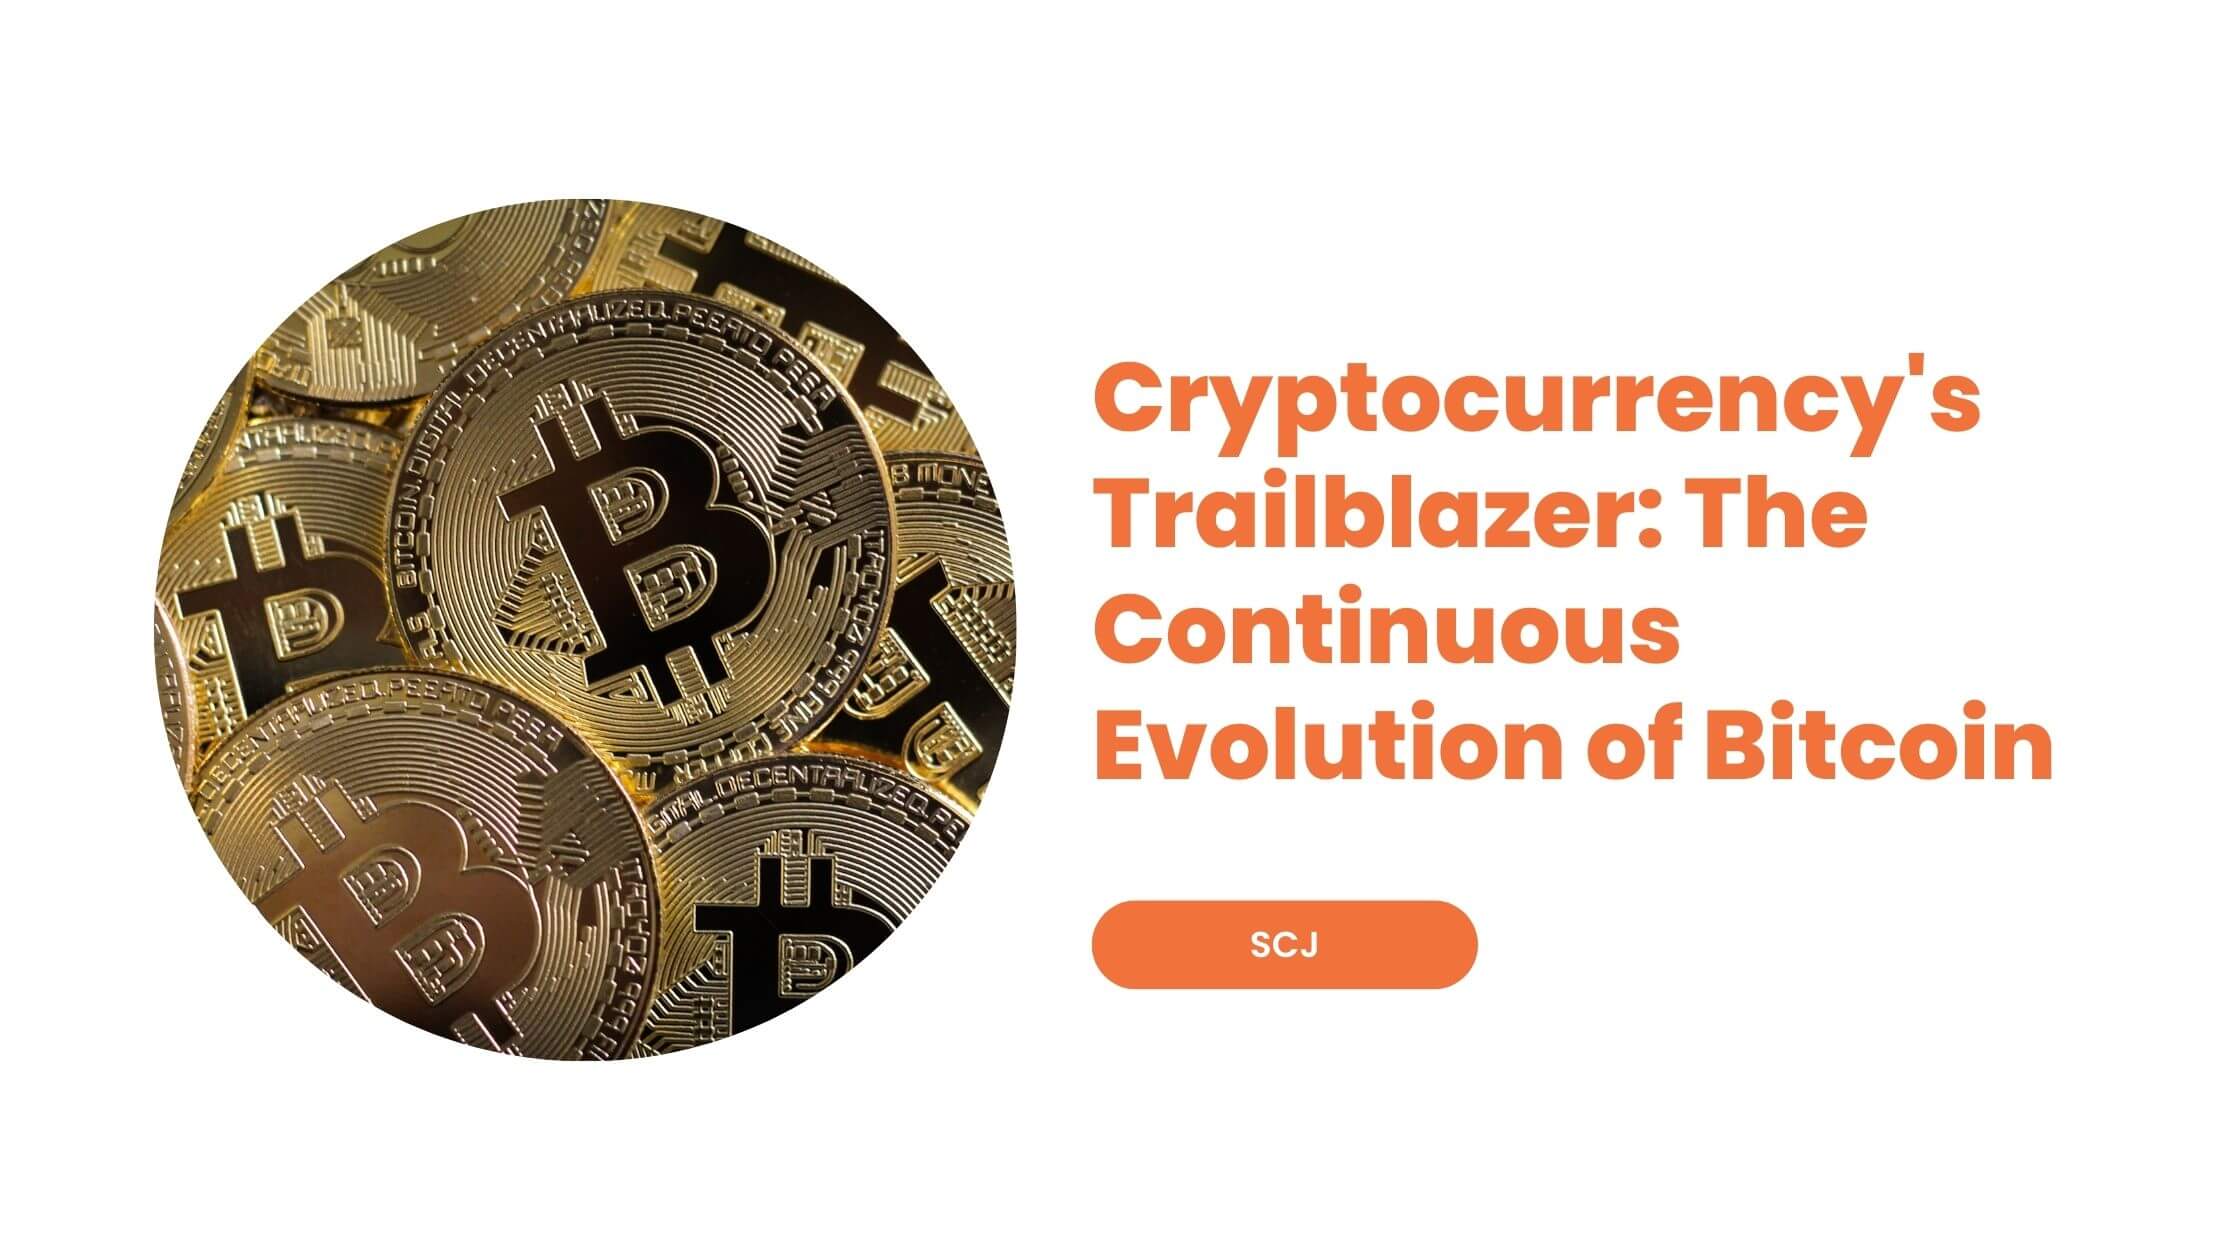 Cryptocurrency's Trailblazer The Continuous Evolution of Bitcoin